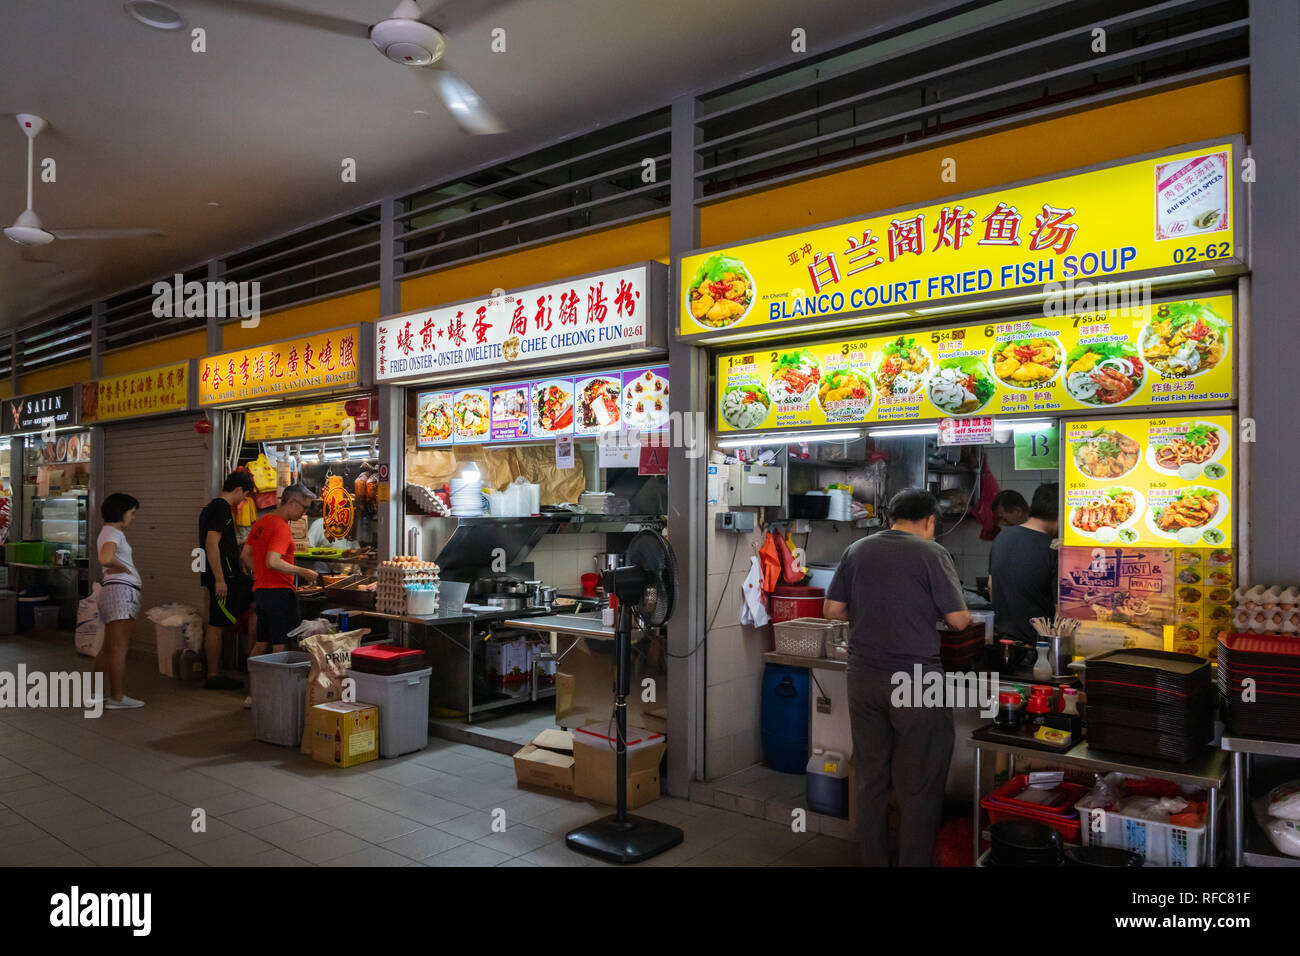 Singapore - January 2019: Street food stalls in hawker center in Singapore central area. Hawker centers are inexpensive open-air food courts Stock Photo